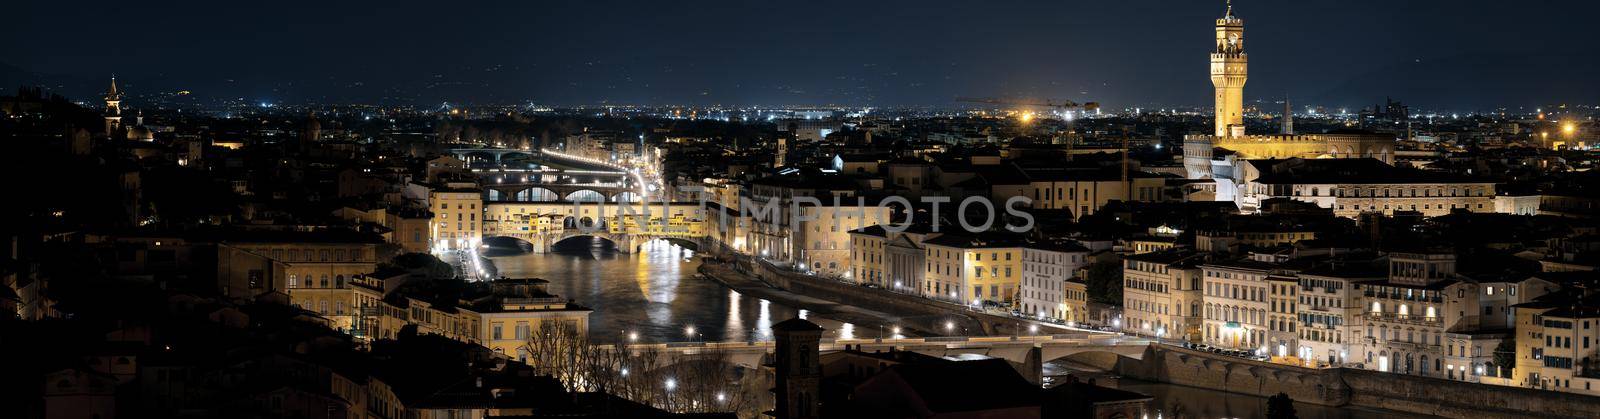 Beautiful night panoramic view of Florence, Ponte Vecchio, Arnolfo tower and river Arno. Cultural famous places in hi-res shot. Tuscany, Italy. by photolime